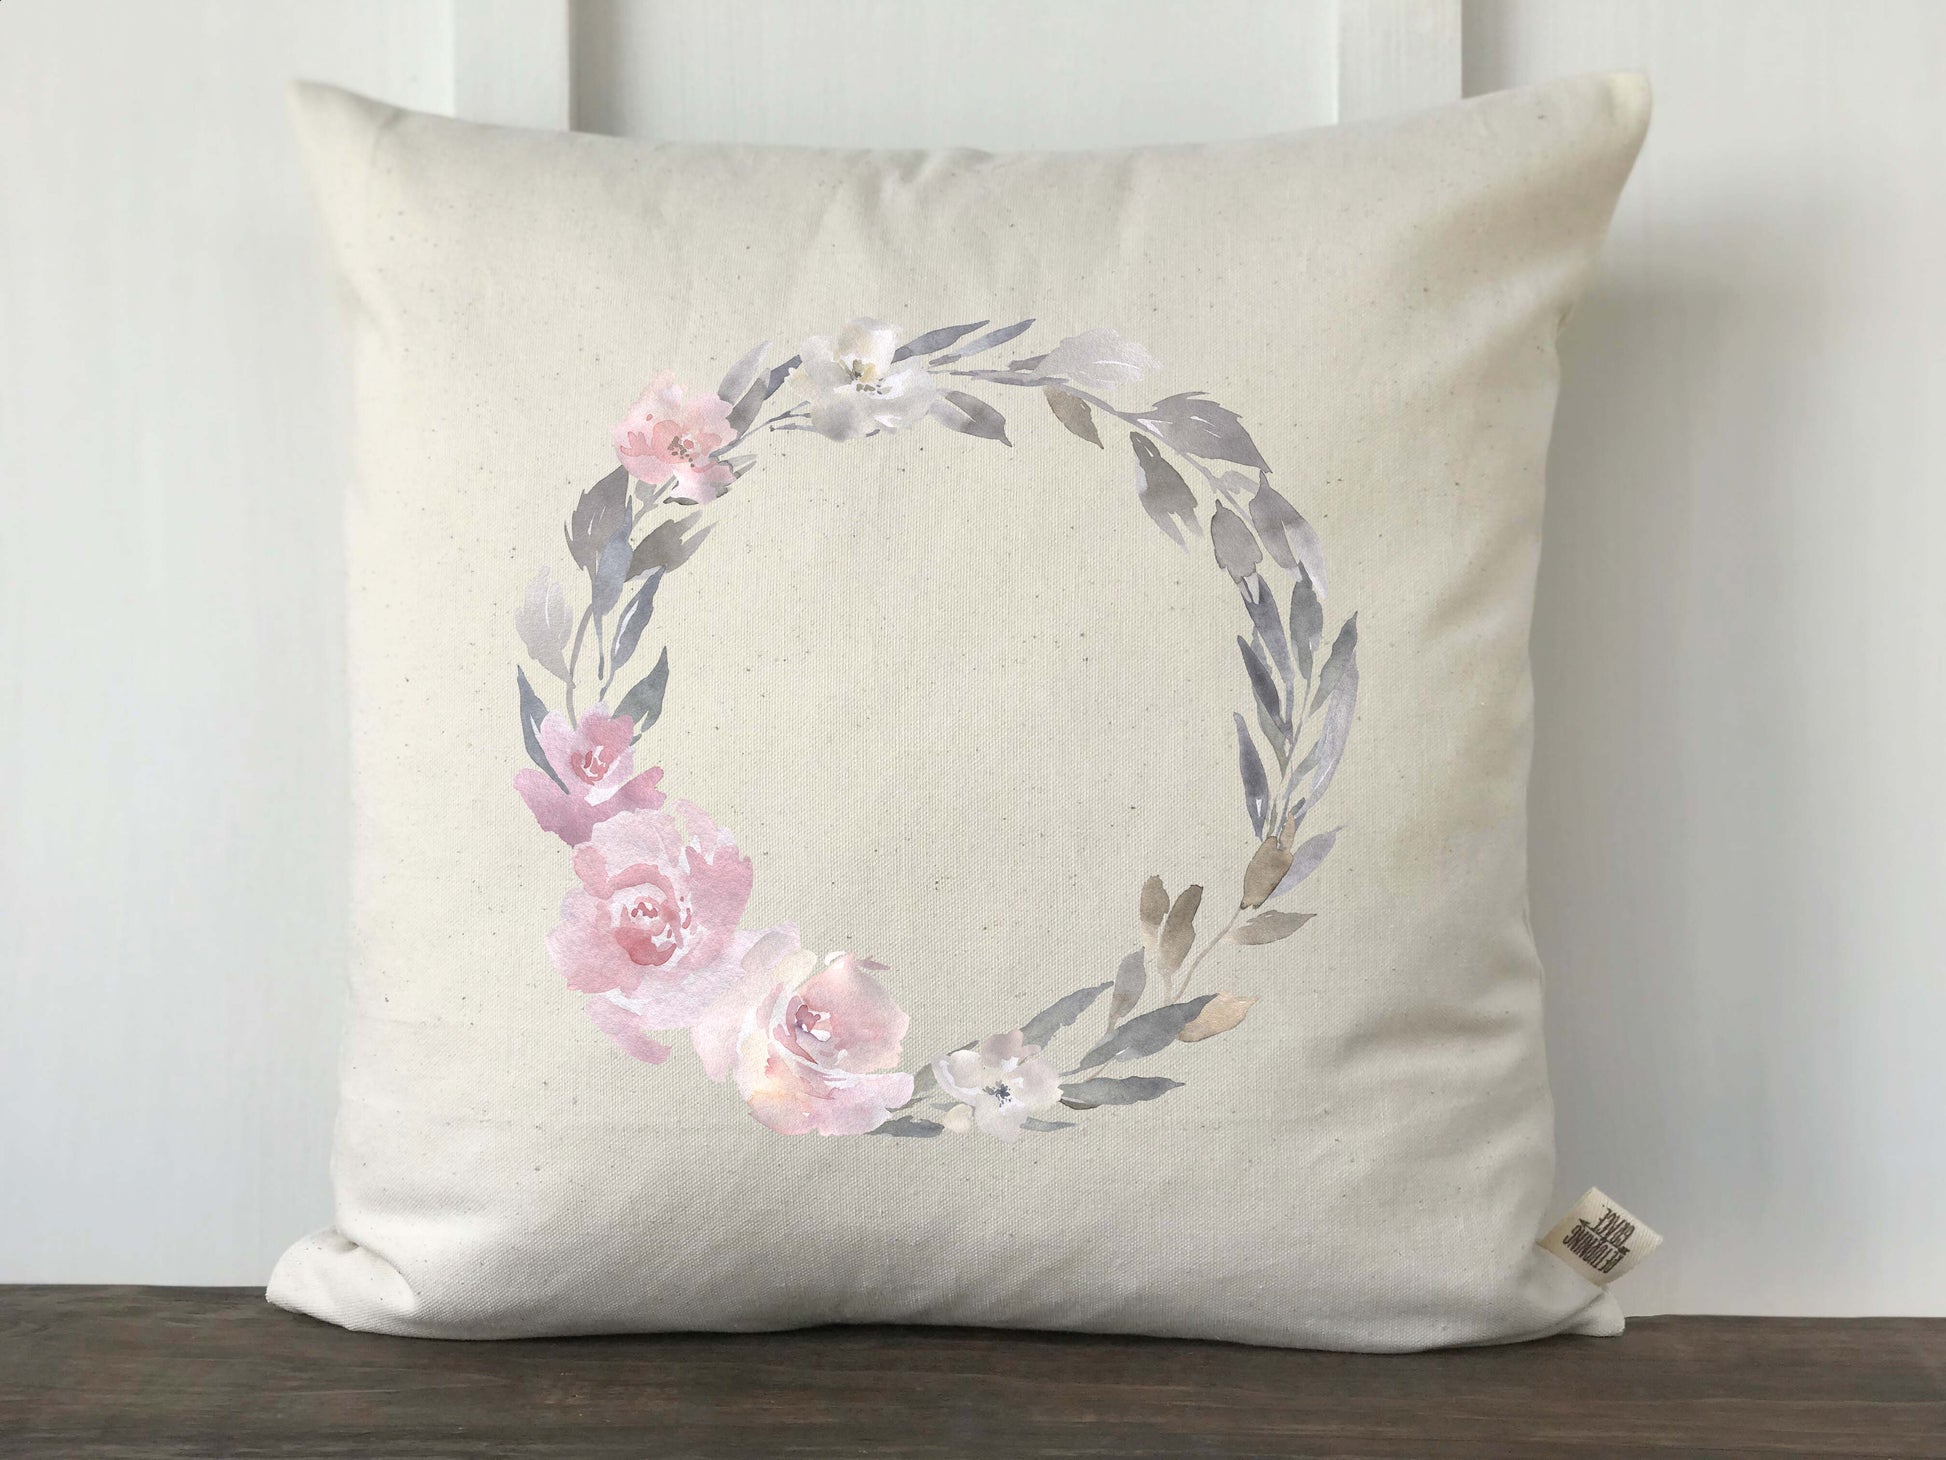 Pink and Gray Watercolor Floral Wreath Pillow Cover - Returning Grace Designs